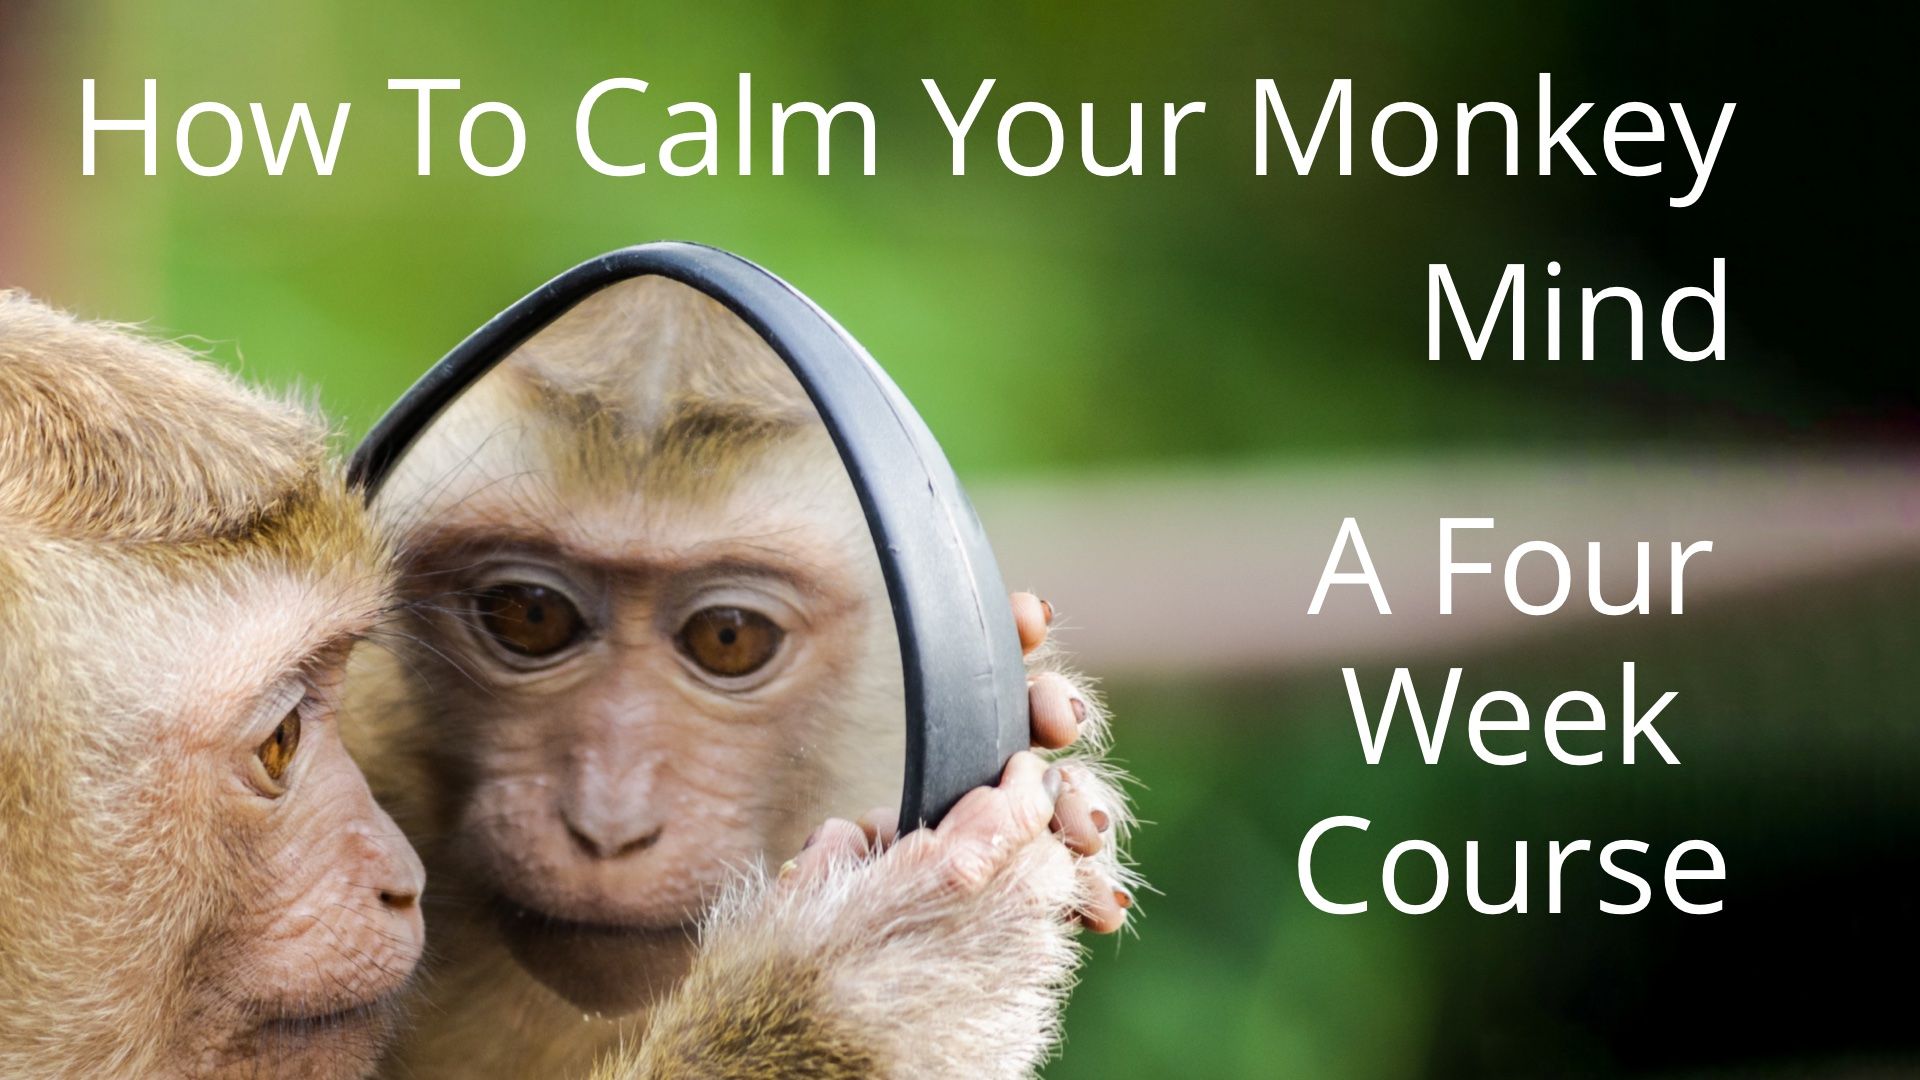 Calming The Monkey Mind - 3. The path to a calm mind